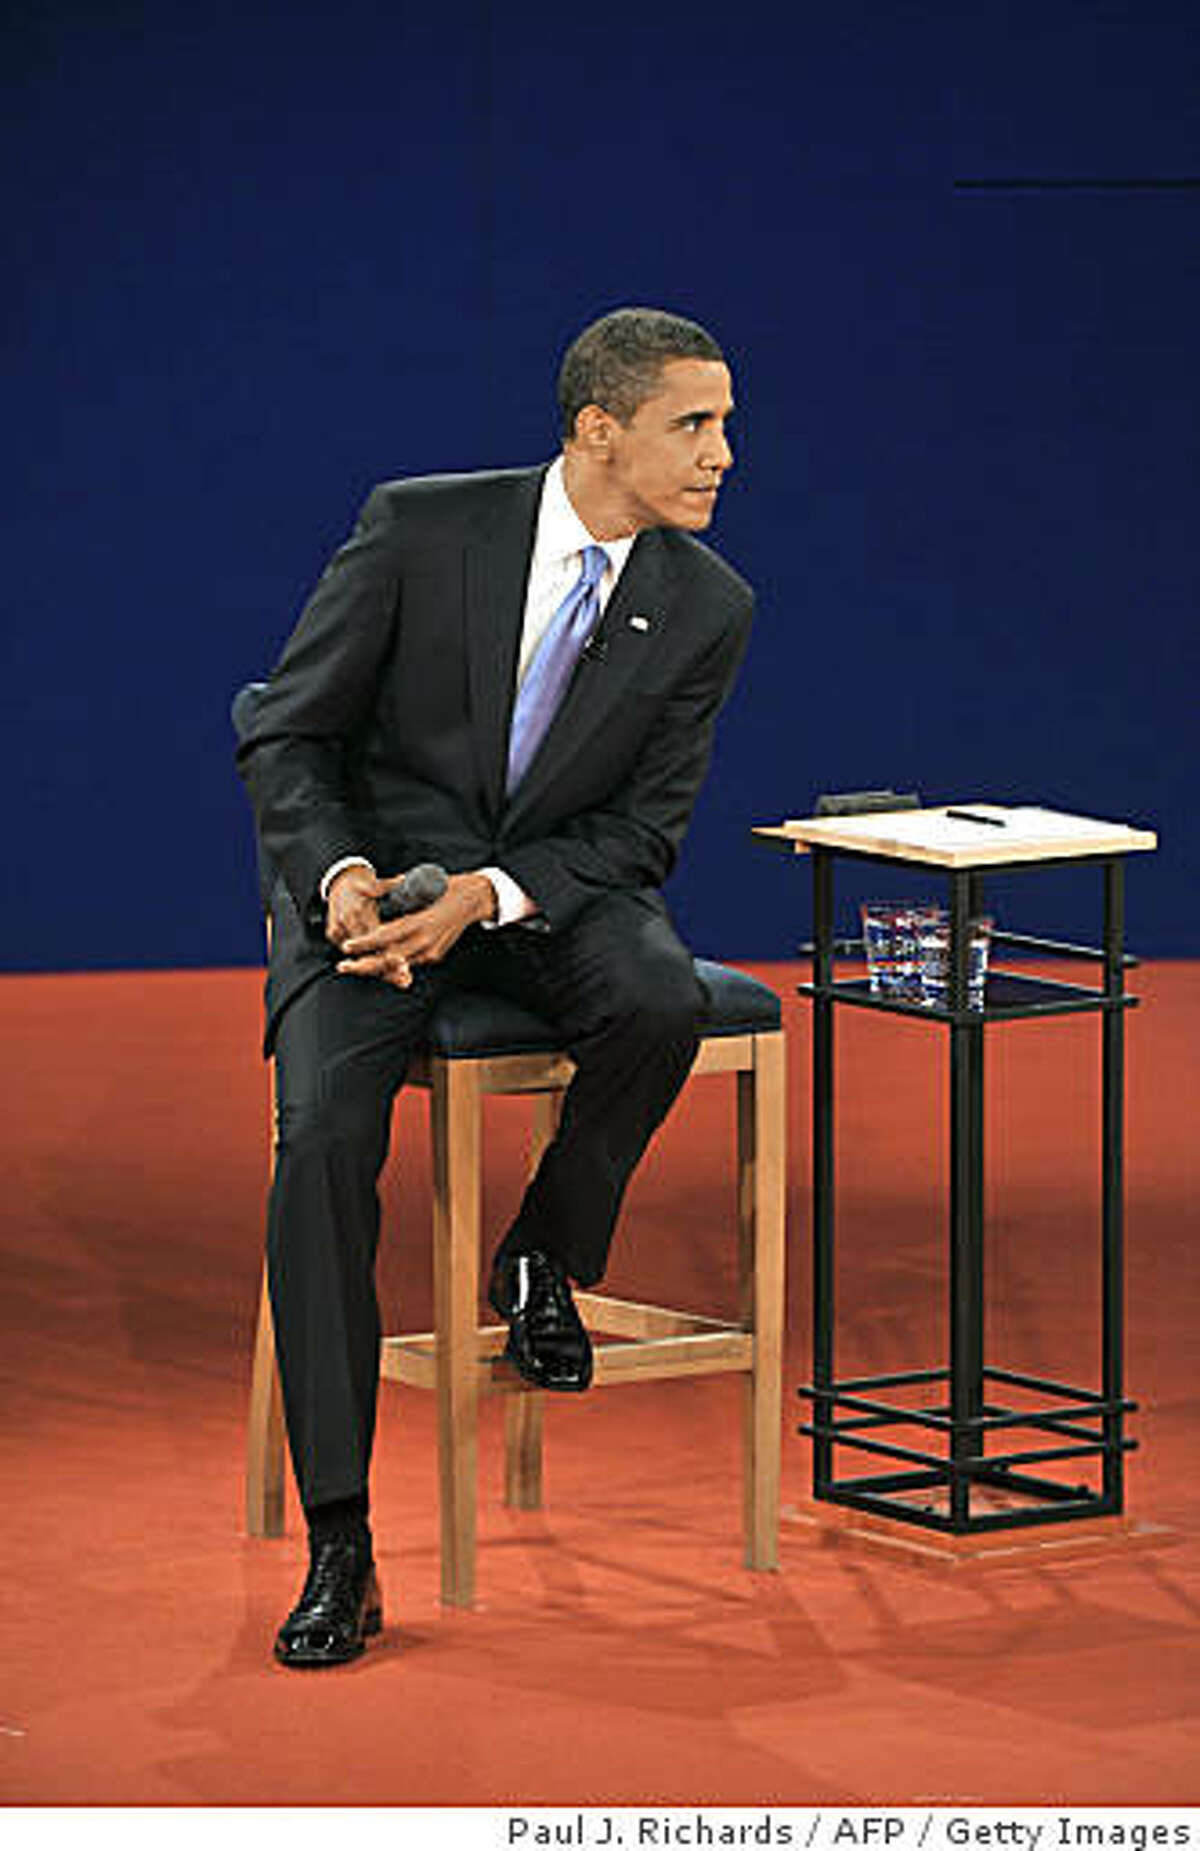 Democrat Barck Obama listens to Republican John McCain during their second presidential debate at Belmont University's Curb Event Center on October 7, 2008 in Nashville, Tennessee.